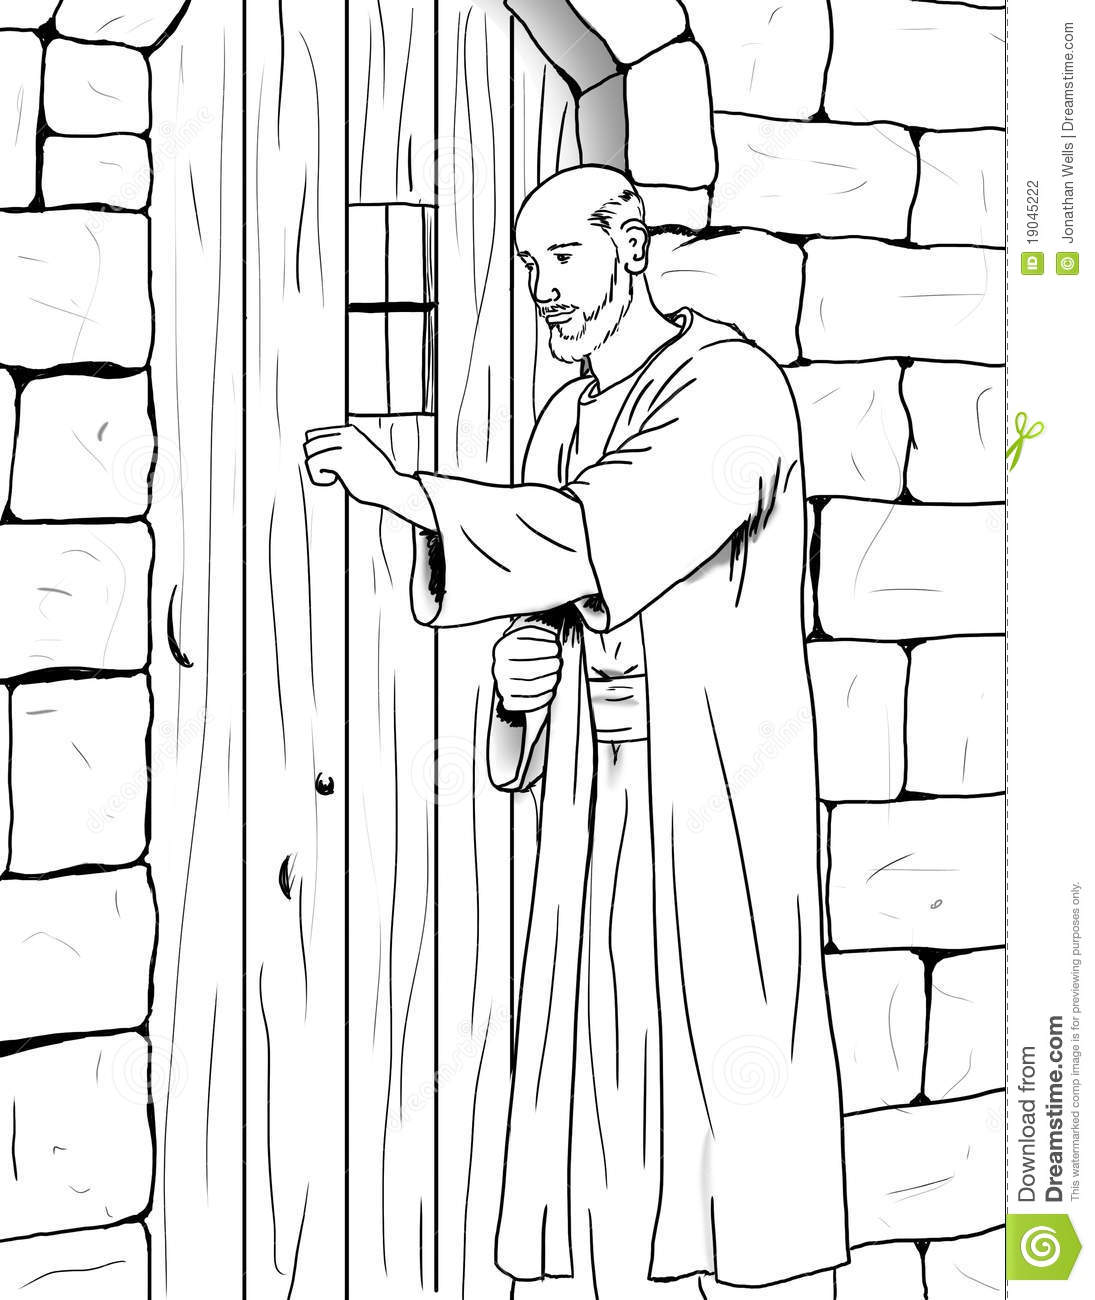 Black And White Drawing Of A Man Knocking On A Door